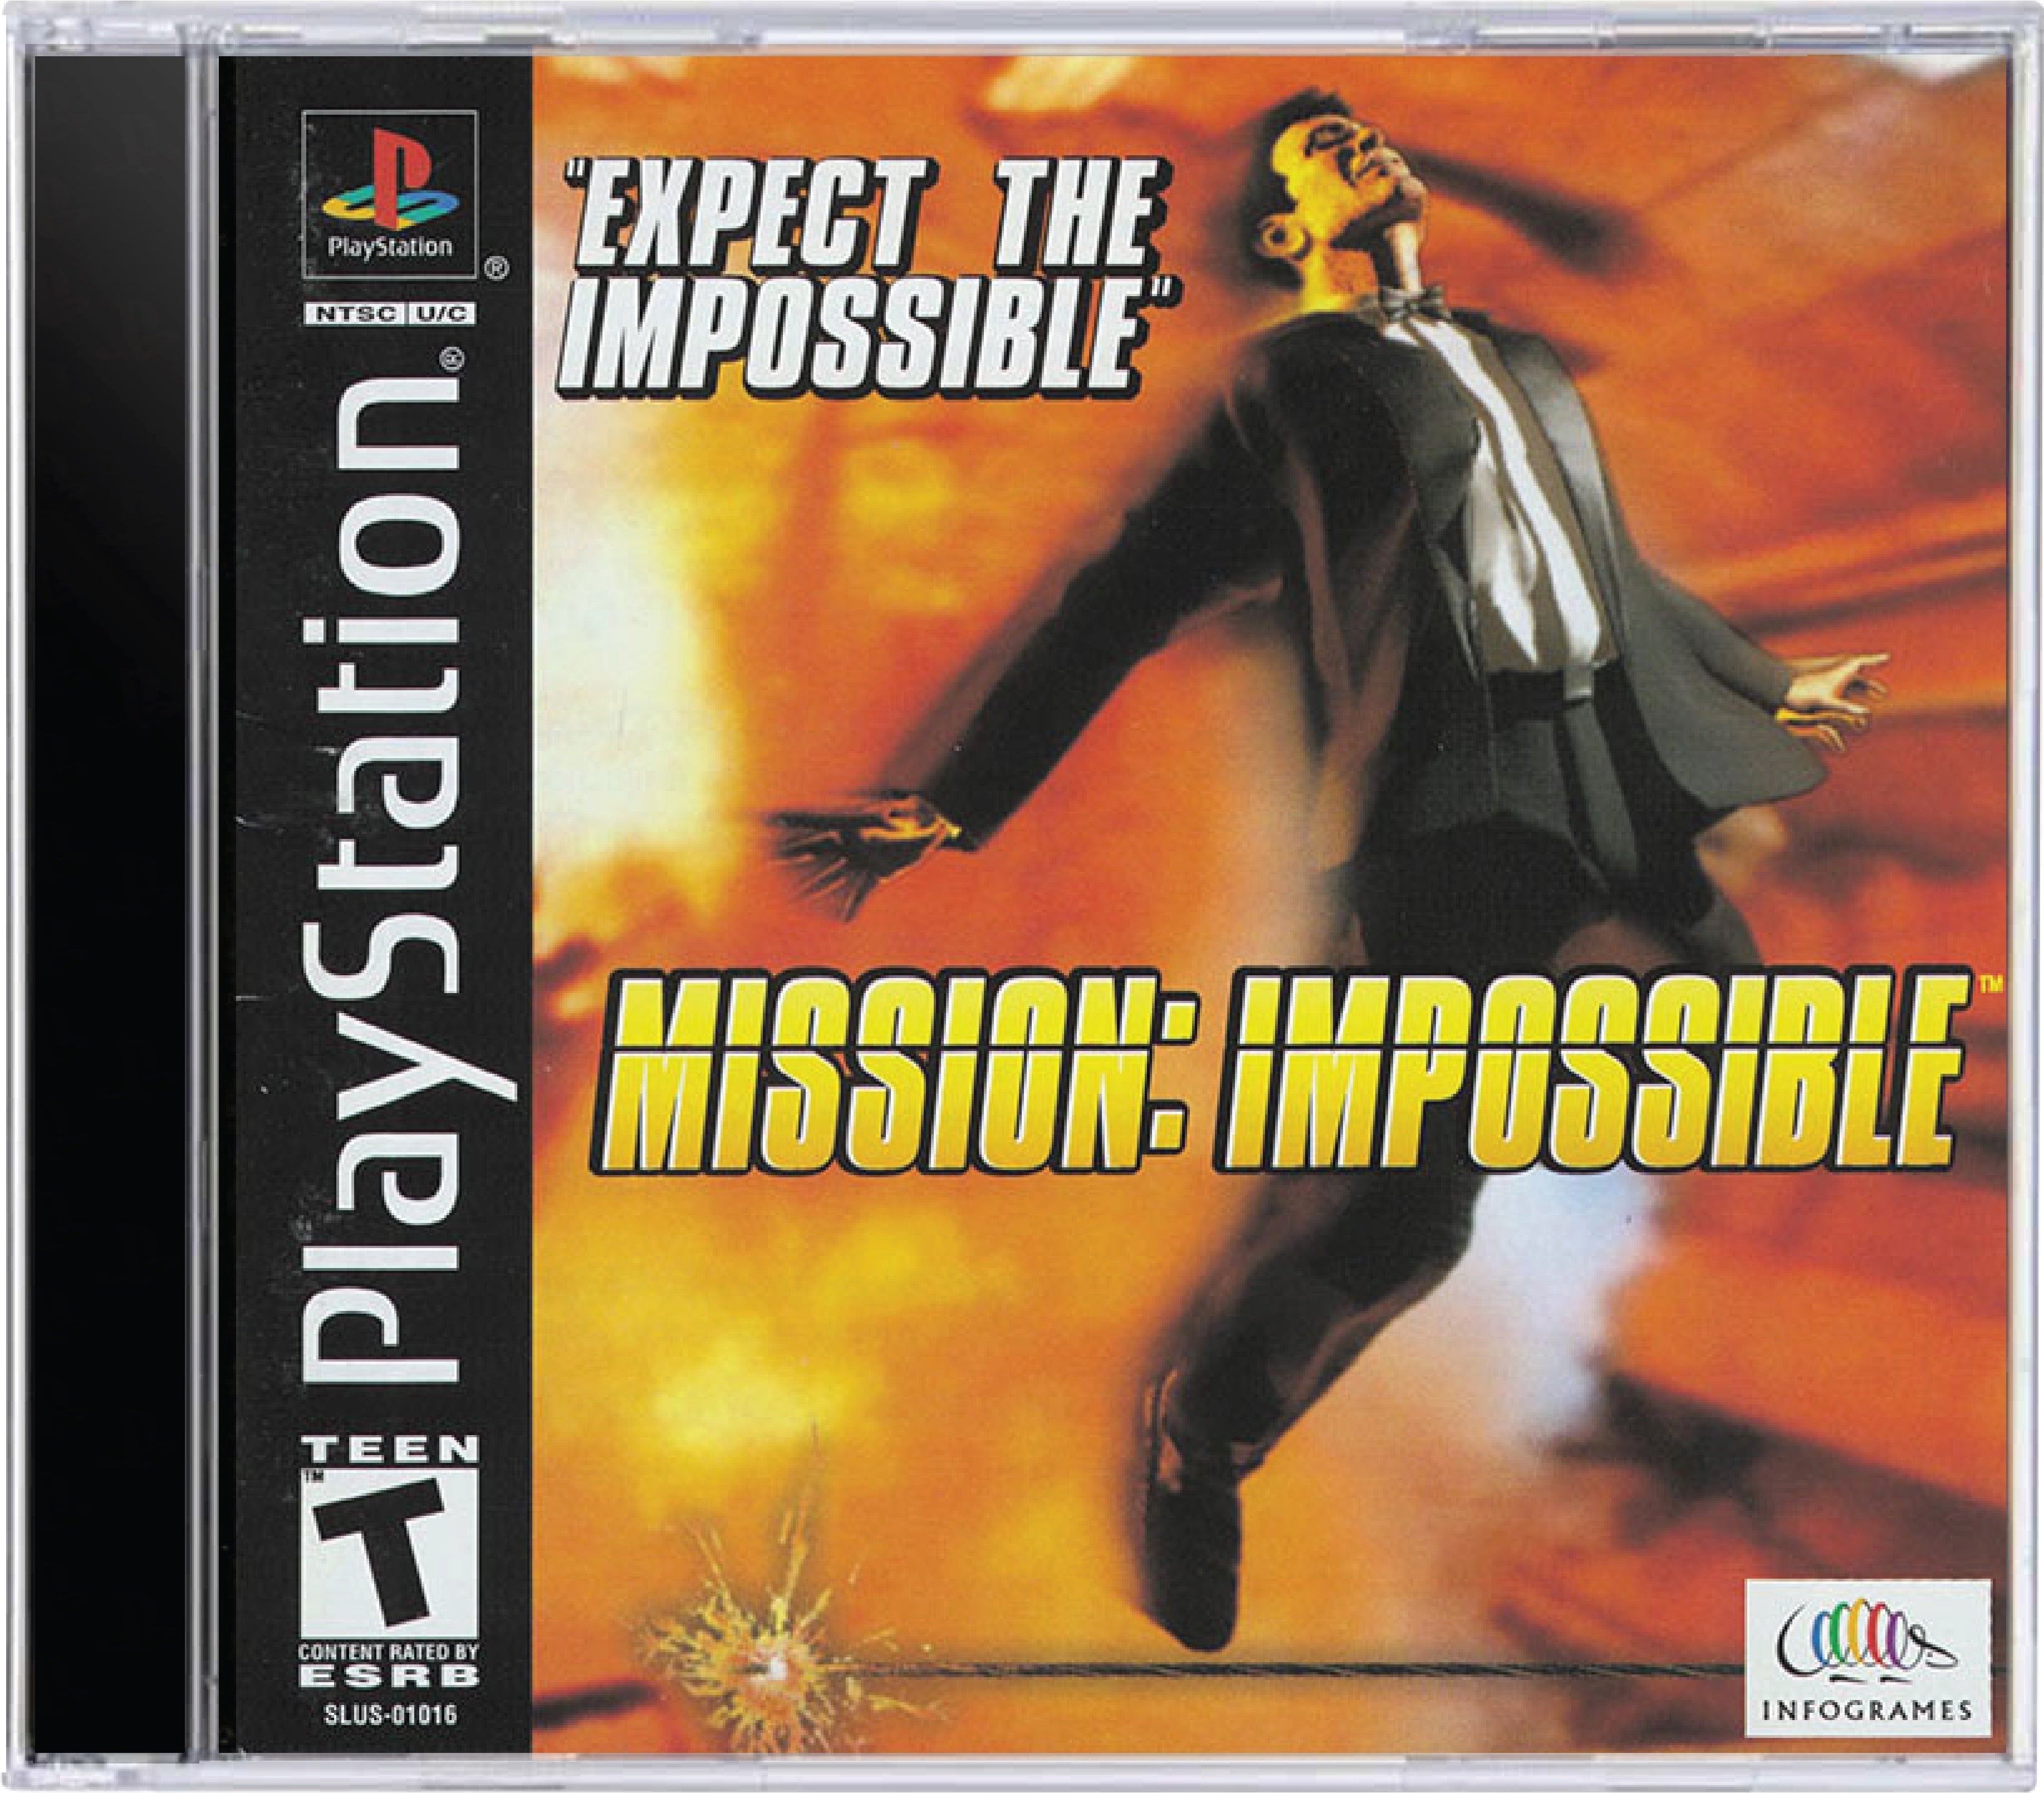 Mission Impossible Cover Art and Product Photo